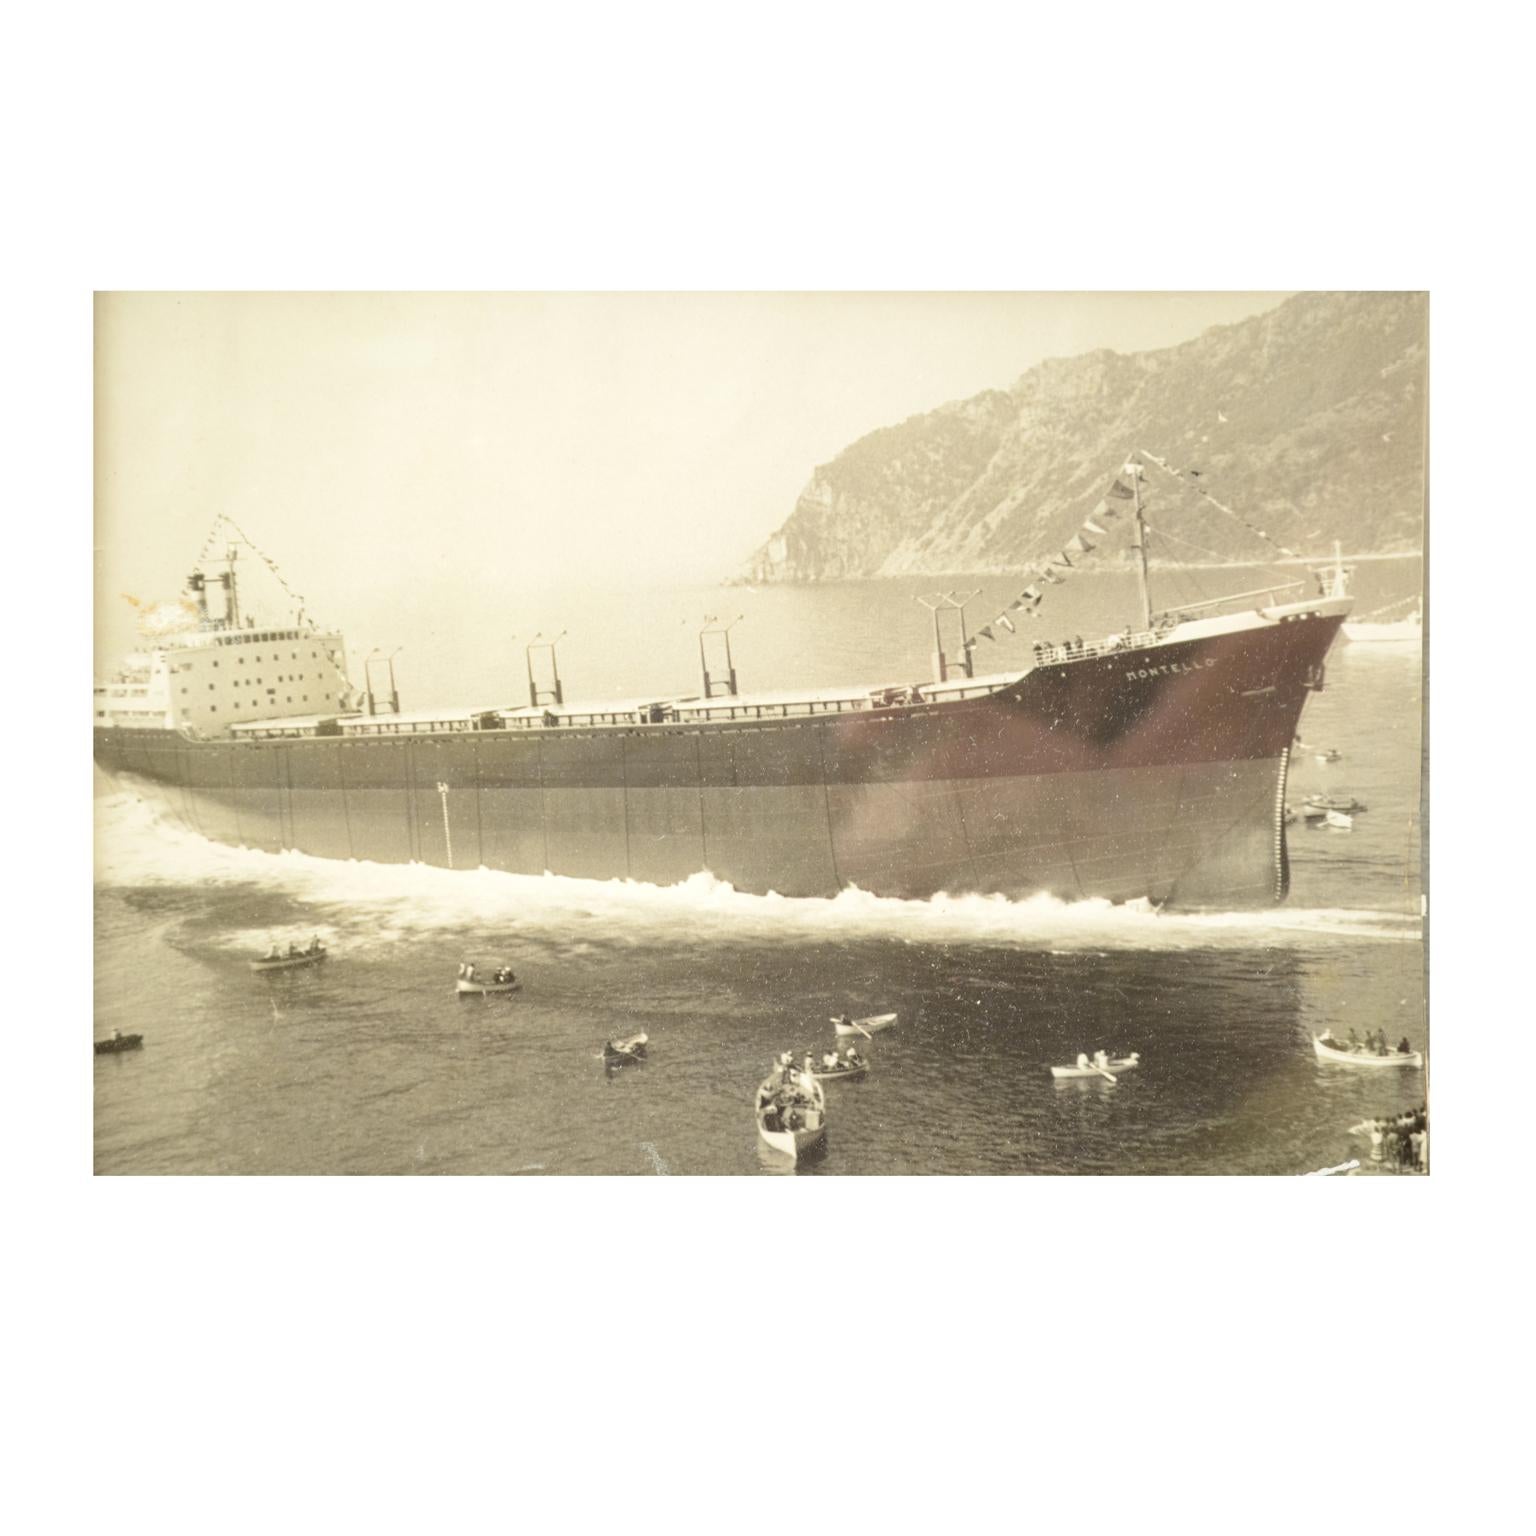 Rectangular frame with three pictures depicting three ships launching in Riva Trigoso shipyards. Montello launched on October 14, 1961; Athinai launched on September 10, 1953; Esso Liguria launched on July 12, 1954. Coeval frame, good condition.